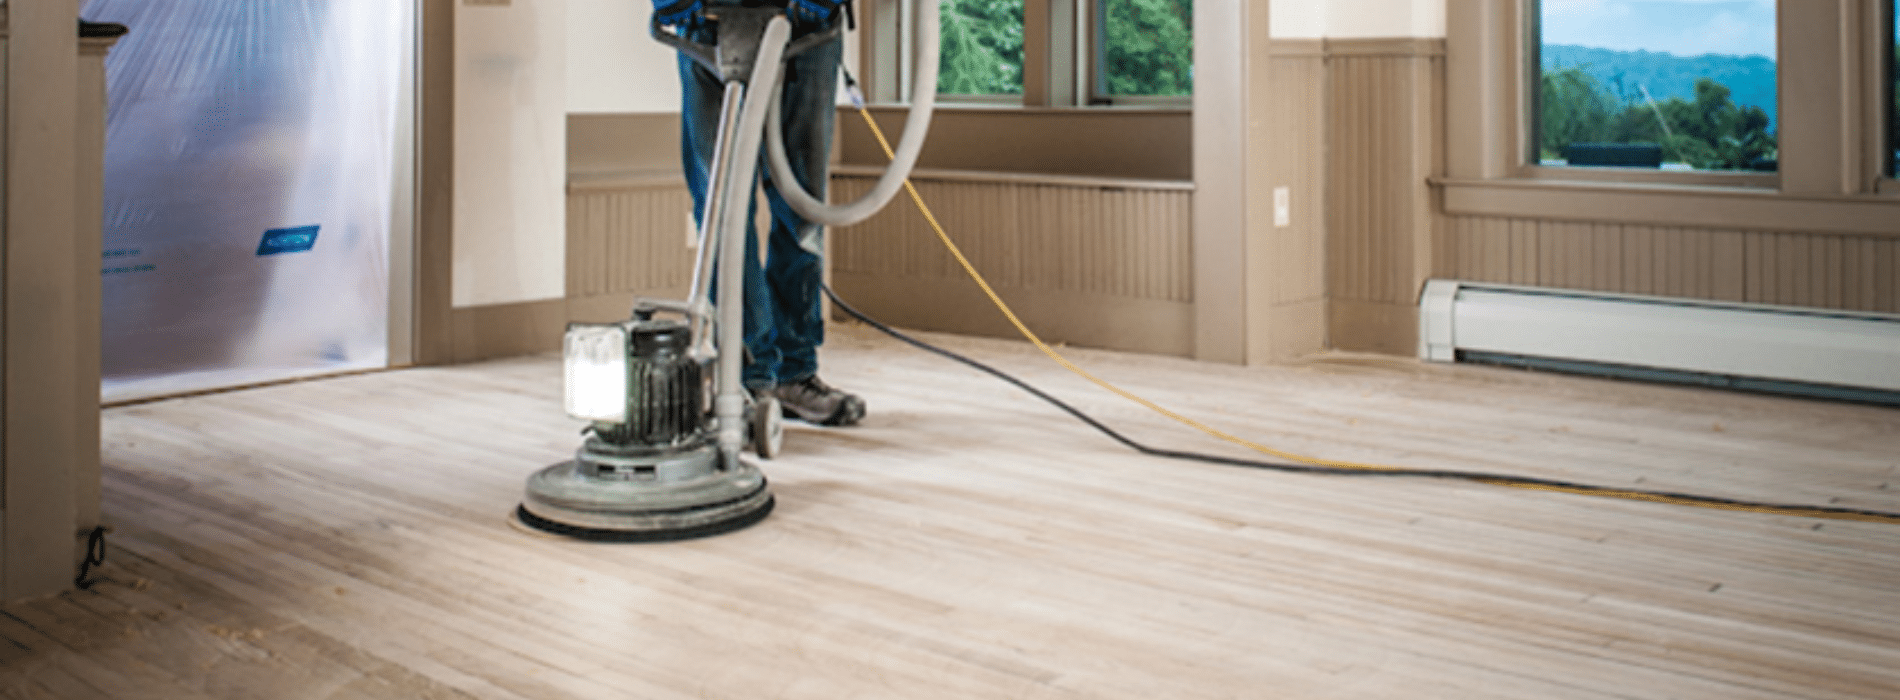 Mr Sander® use a Bona FlexiSand 1.9 (Ø 407 mm) buffer sander for sanding parquet floors in Clapham Junction, SW11. With a power of 1.9 kW and voltage of 230 V, it operates at 50 Hz/60 Hz. The sander is connected to a dust extraction system with a HEPA filter, ensuring a clean and efficient outcome.